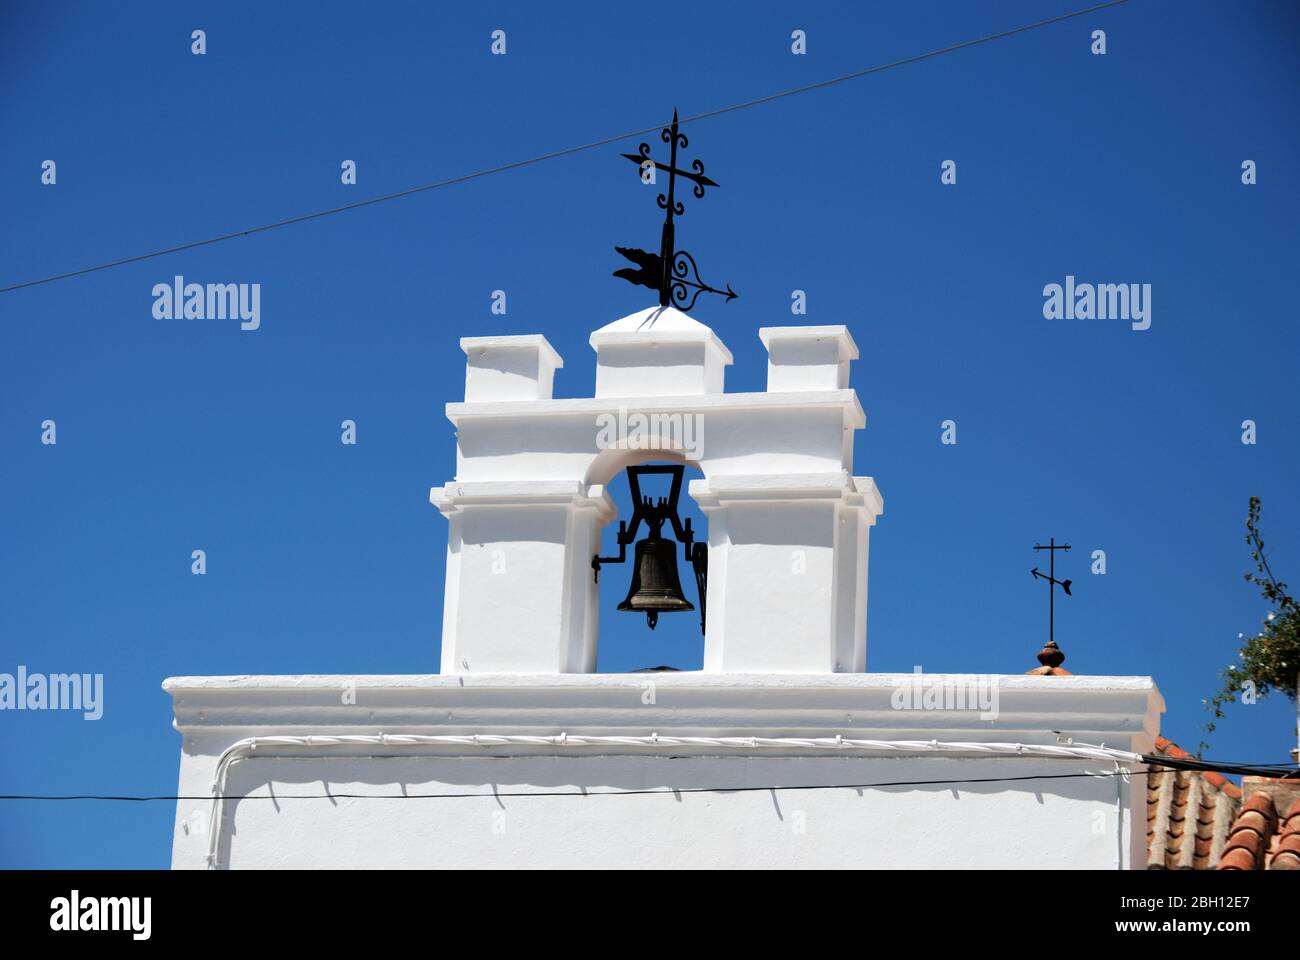 Los Remedios Church bell tower in the old town (also known as Iglesia Santana), Mijas, Malaga Province, Spain Stock Photo